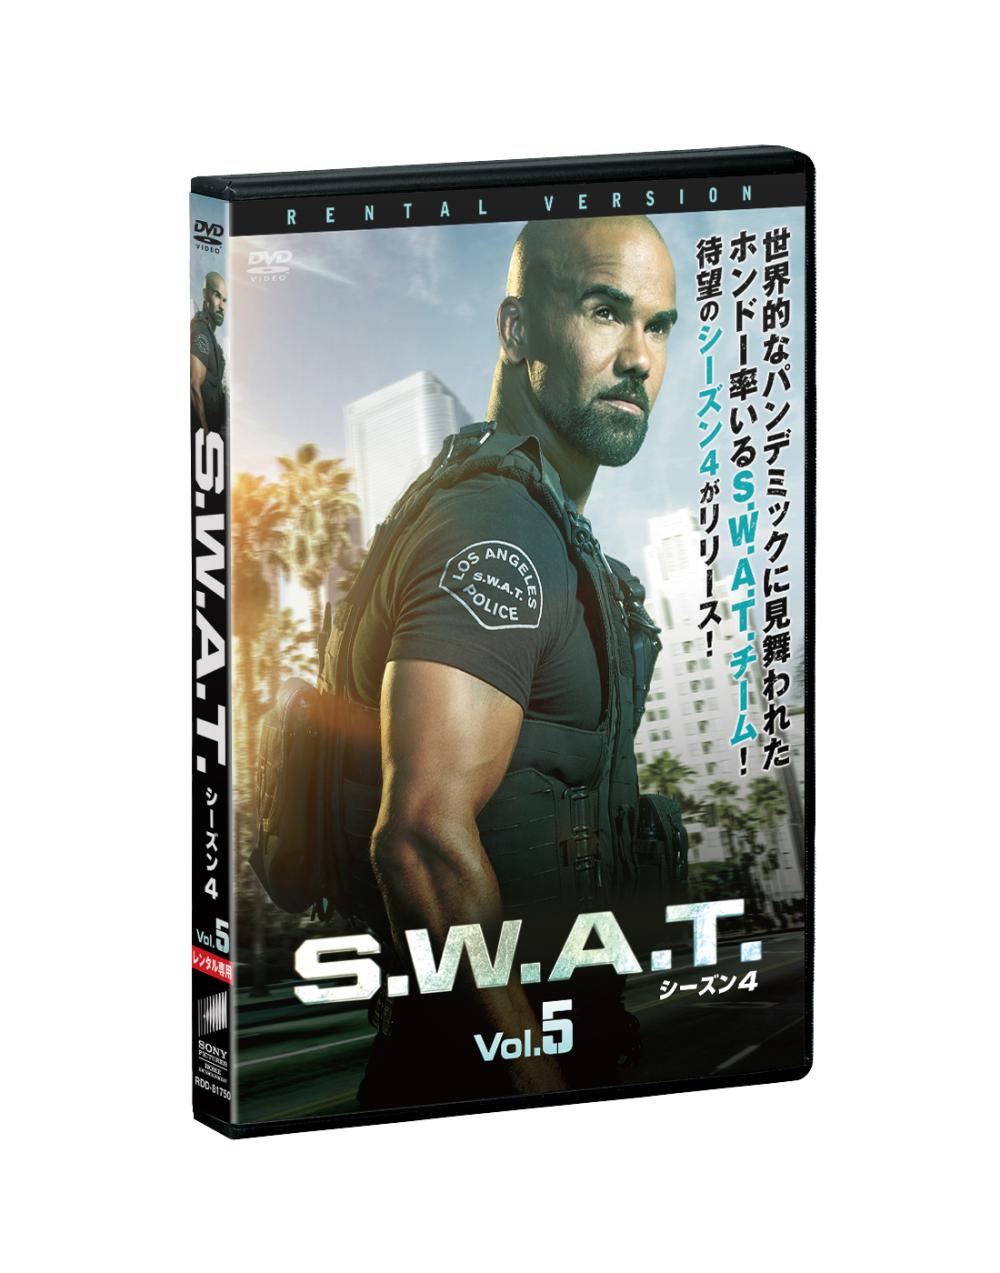 S.W.A.T. シーズン4 | ソニー・ピクチャーズ公式